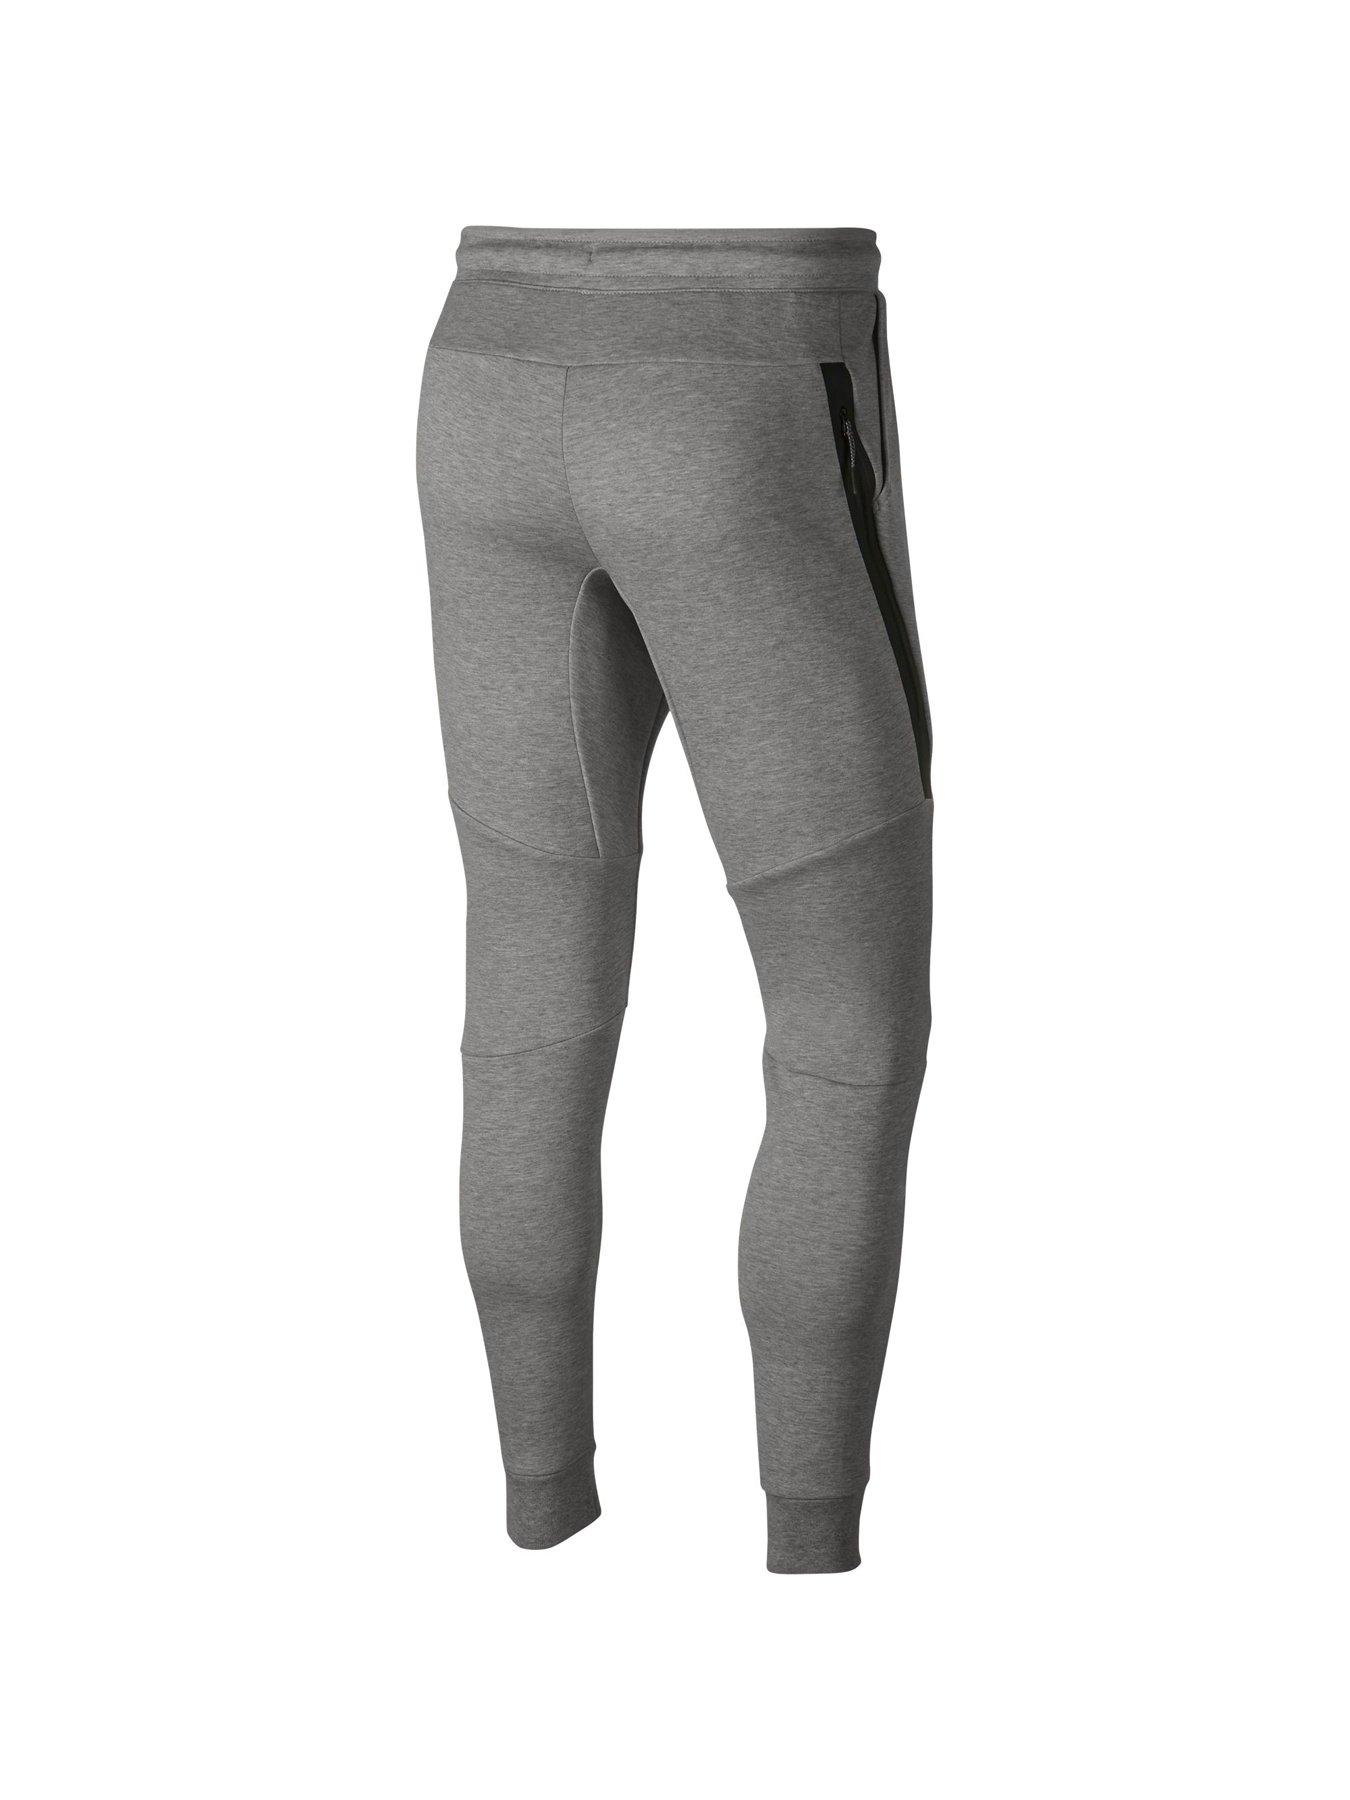 nike tech joggers grey and black